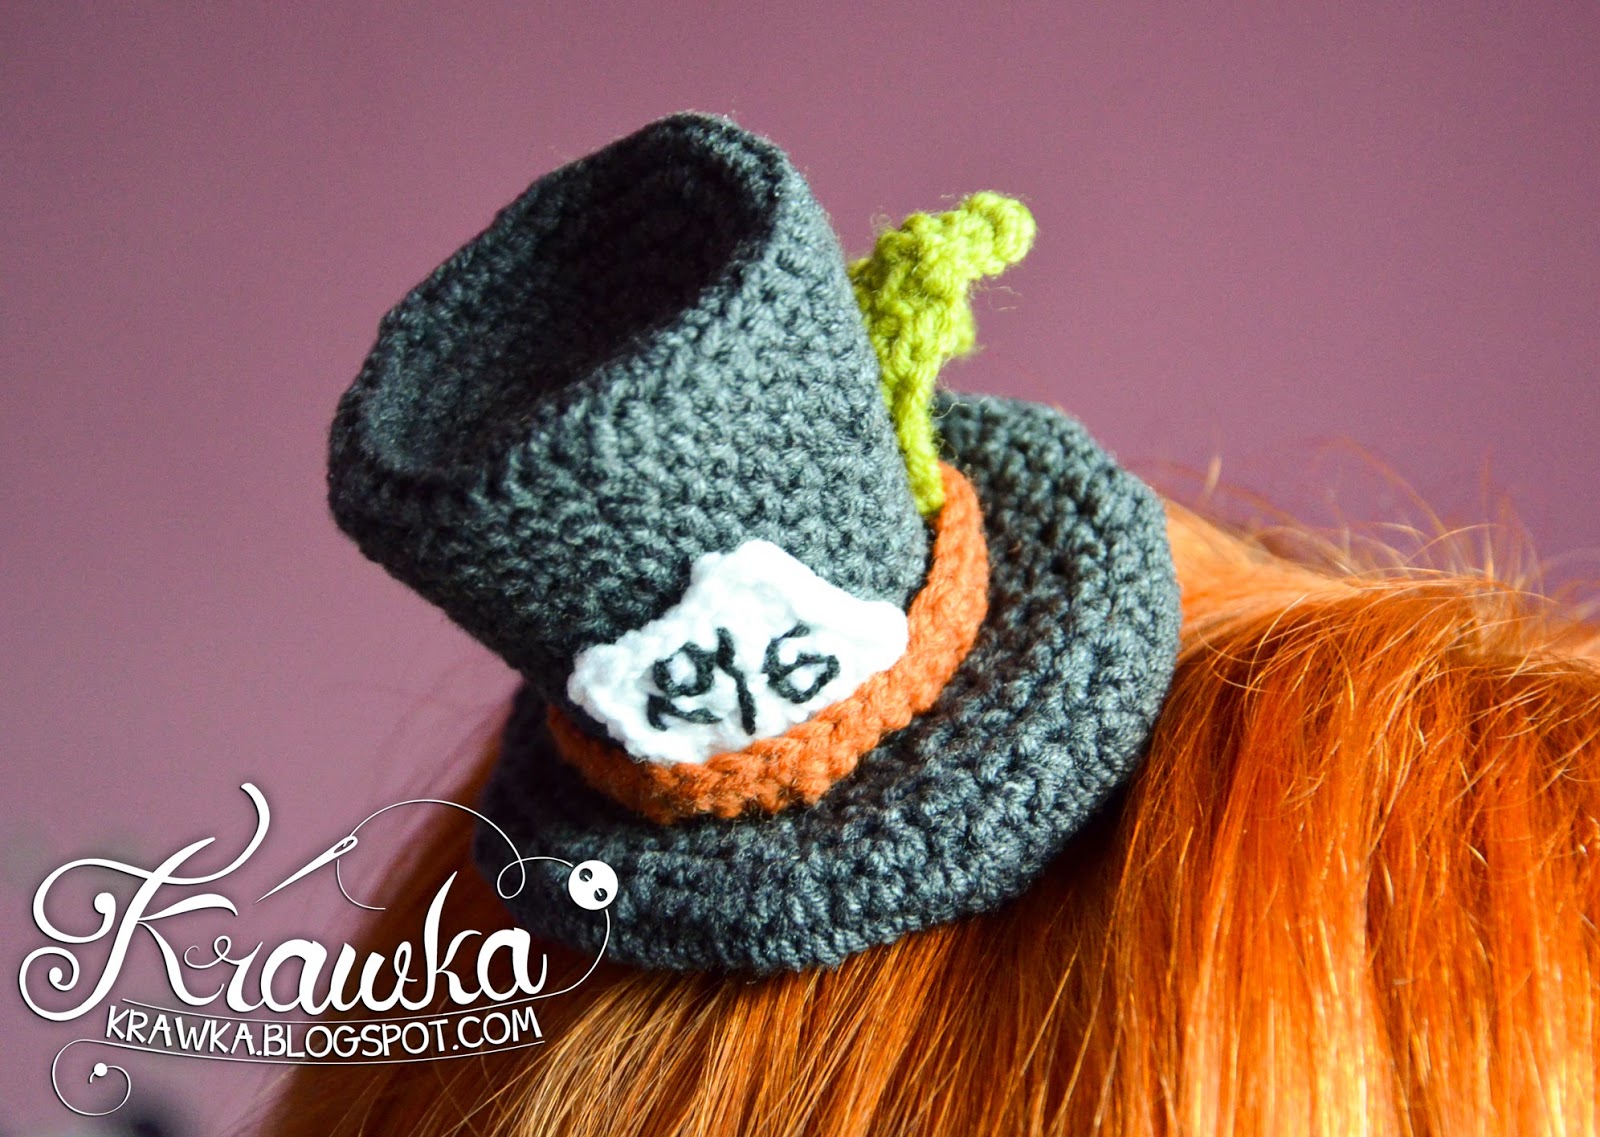 Krawka: Mad Hatter's Little Hat by Crazy Hairclip Maker